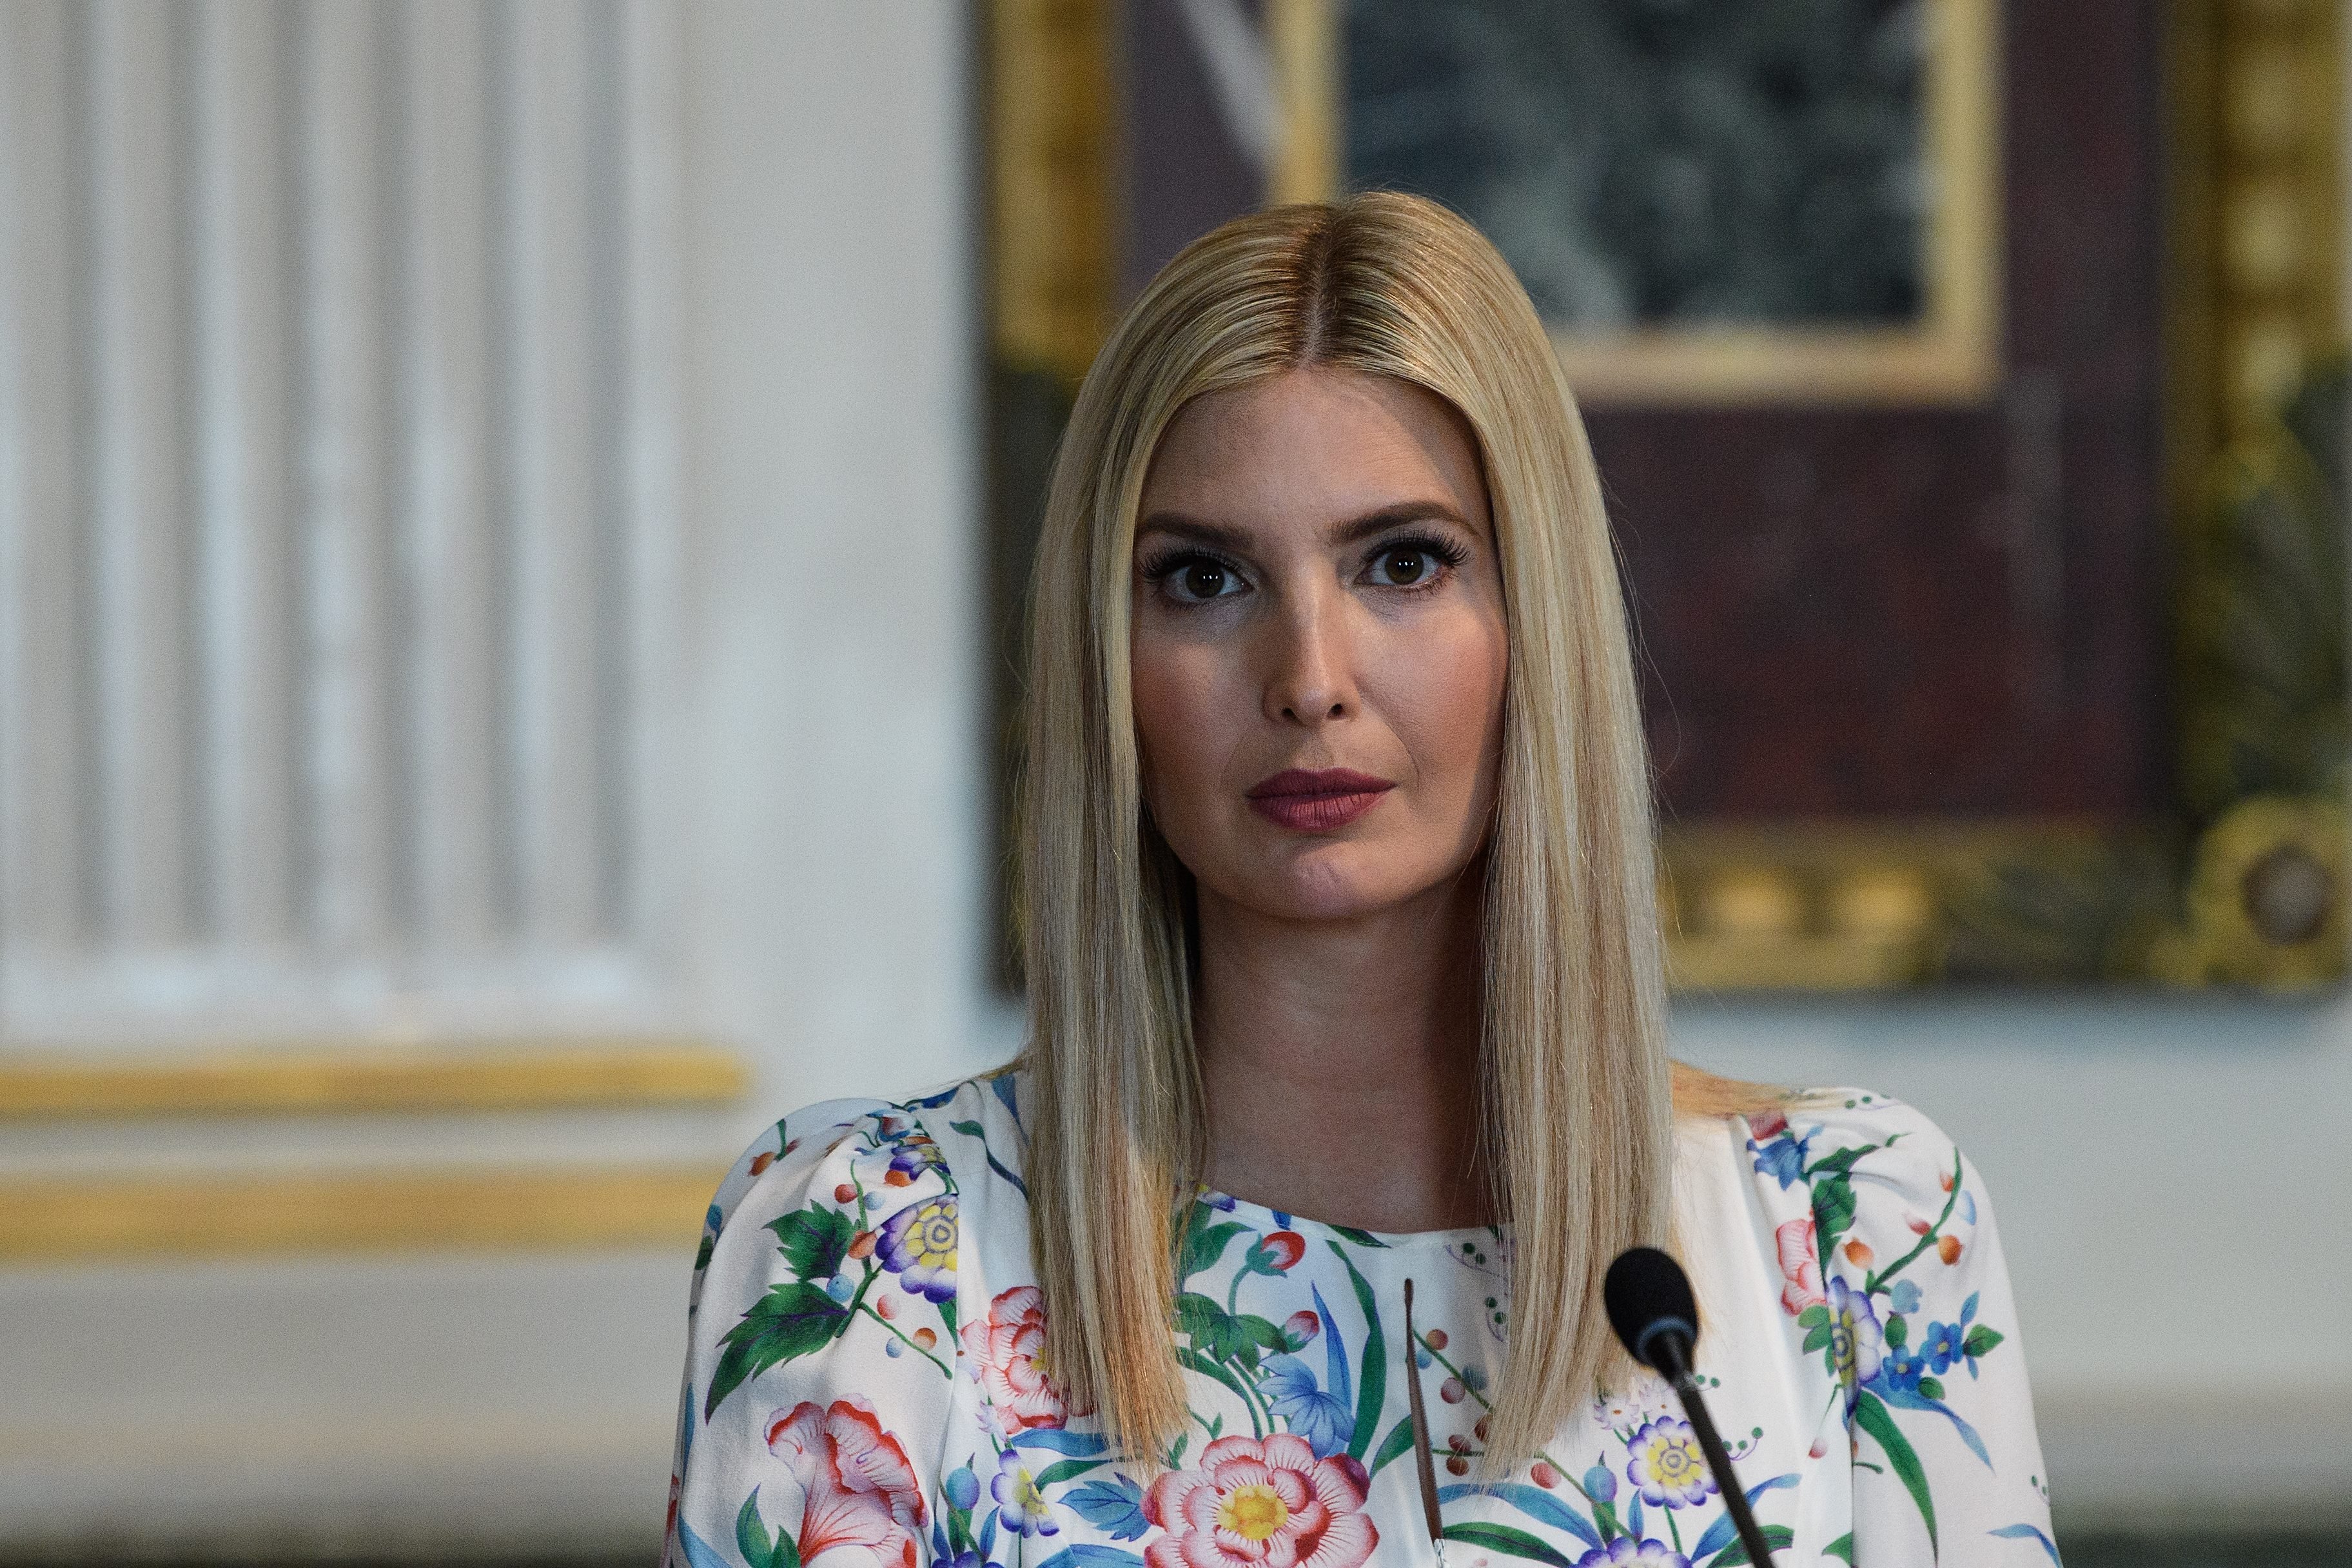 Ivanka Trump, daughter and adviser of US President Donald Trump, at the Eisenhower Executive Office Building in Washington, DC, on August 4, 2020  | Source: Getty Images